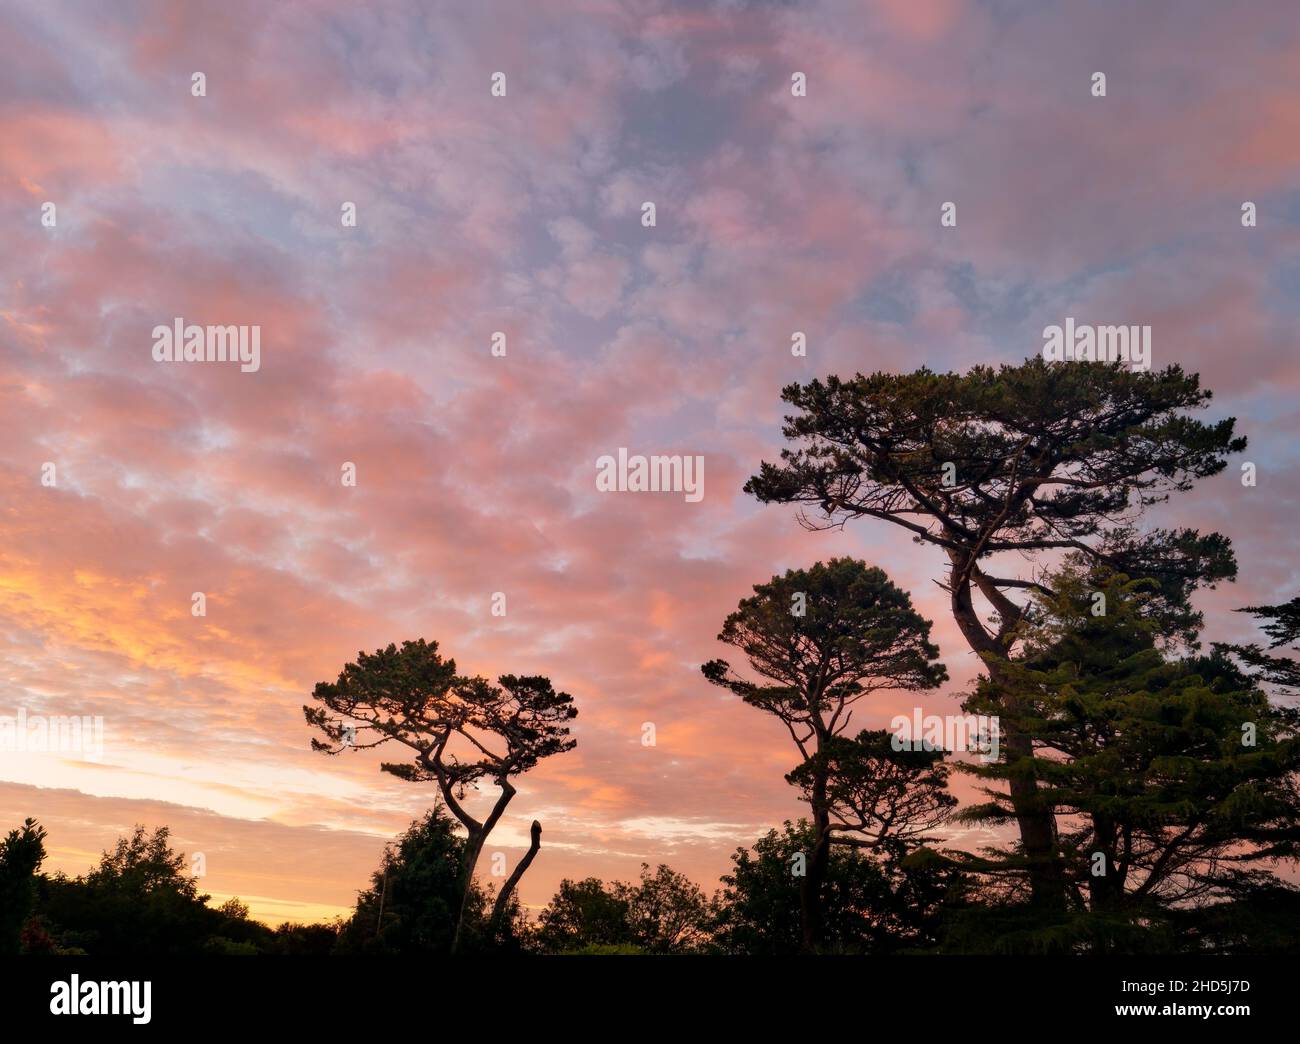 Pine trees at sunset with a colourful background sky. Stock Photo